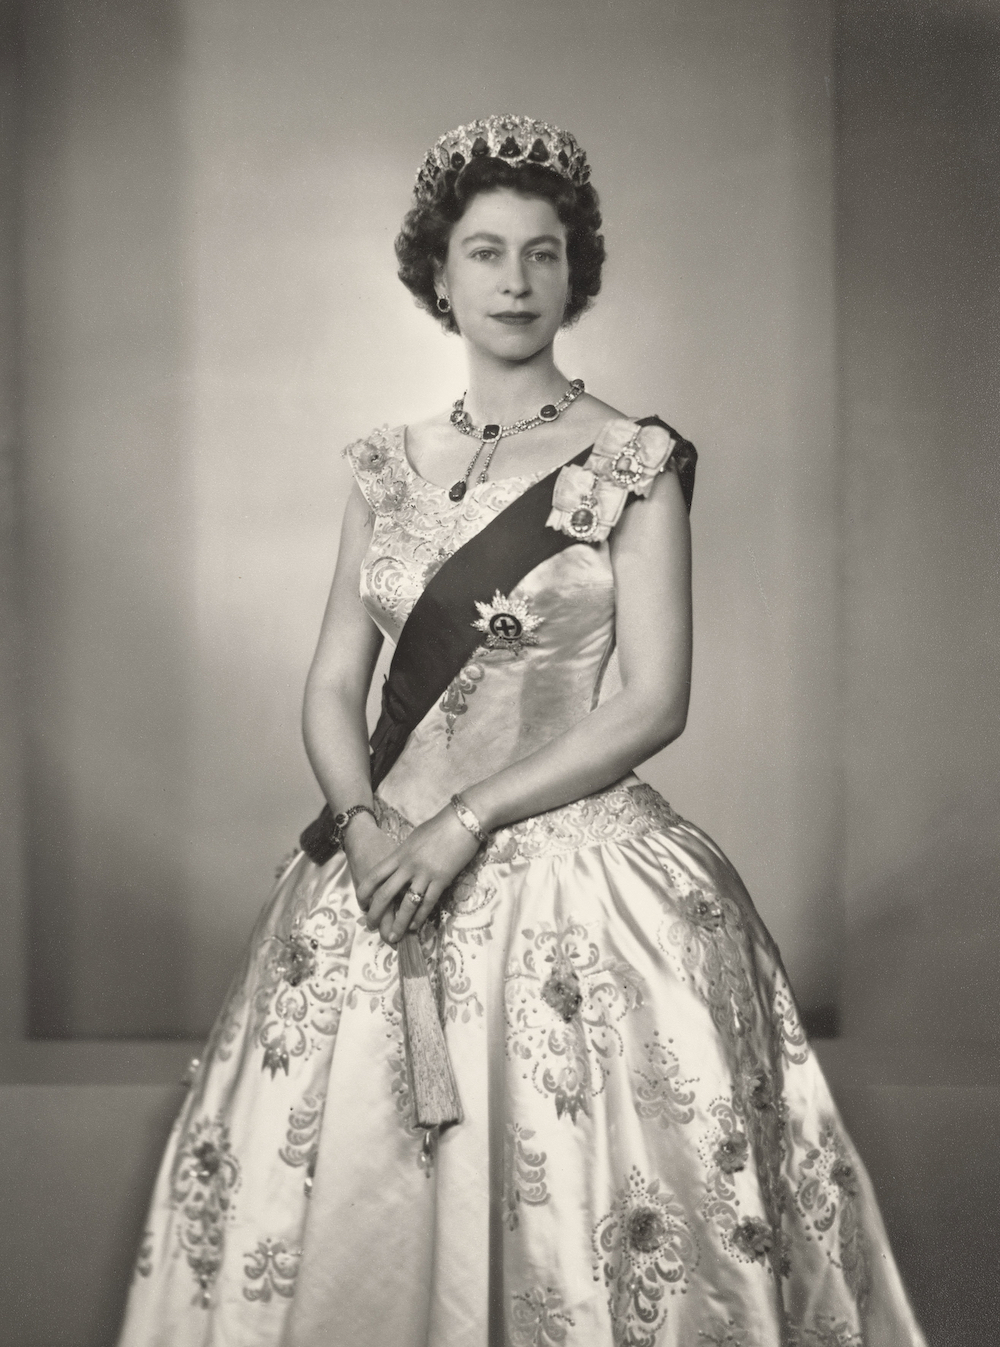 Dorothy Wilding portrait of HM Queen Elizabeth II, May 1956. The Queen wears the Vladimir Tiara and the Delhi Durbar necklace. © William Hustler and Georgina Hustler/Royal Collection Trust